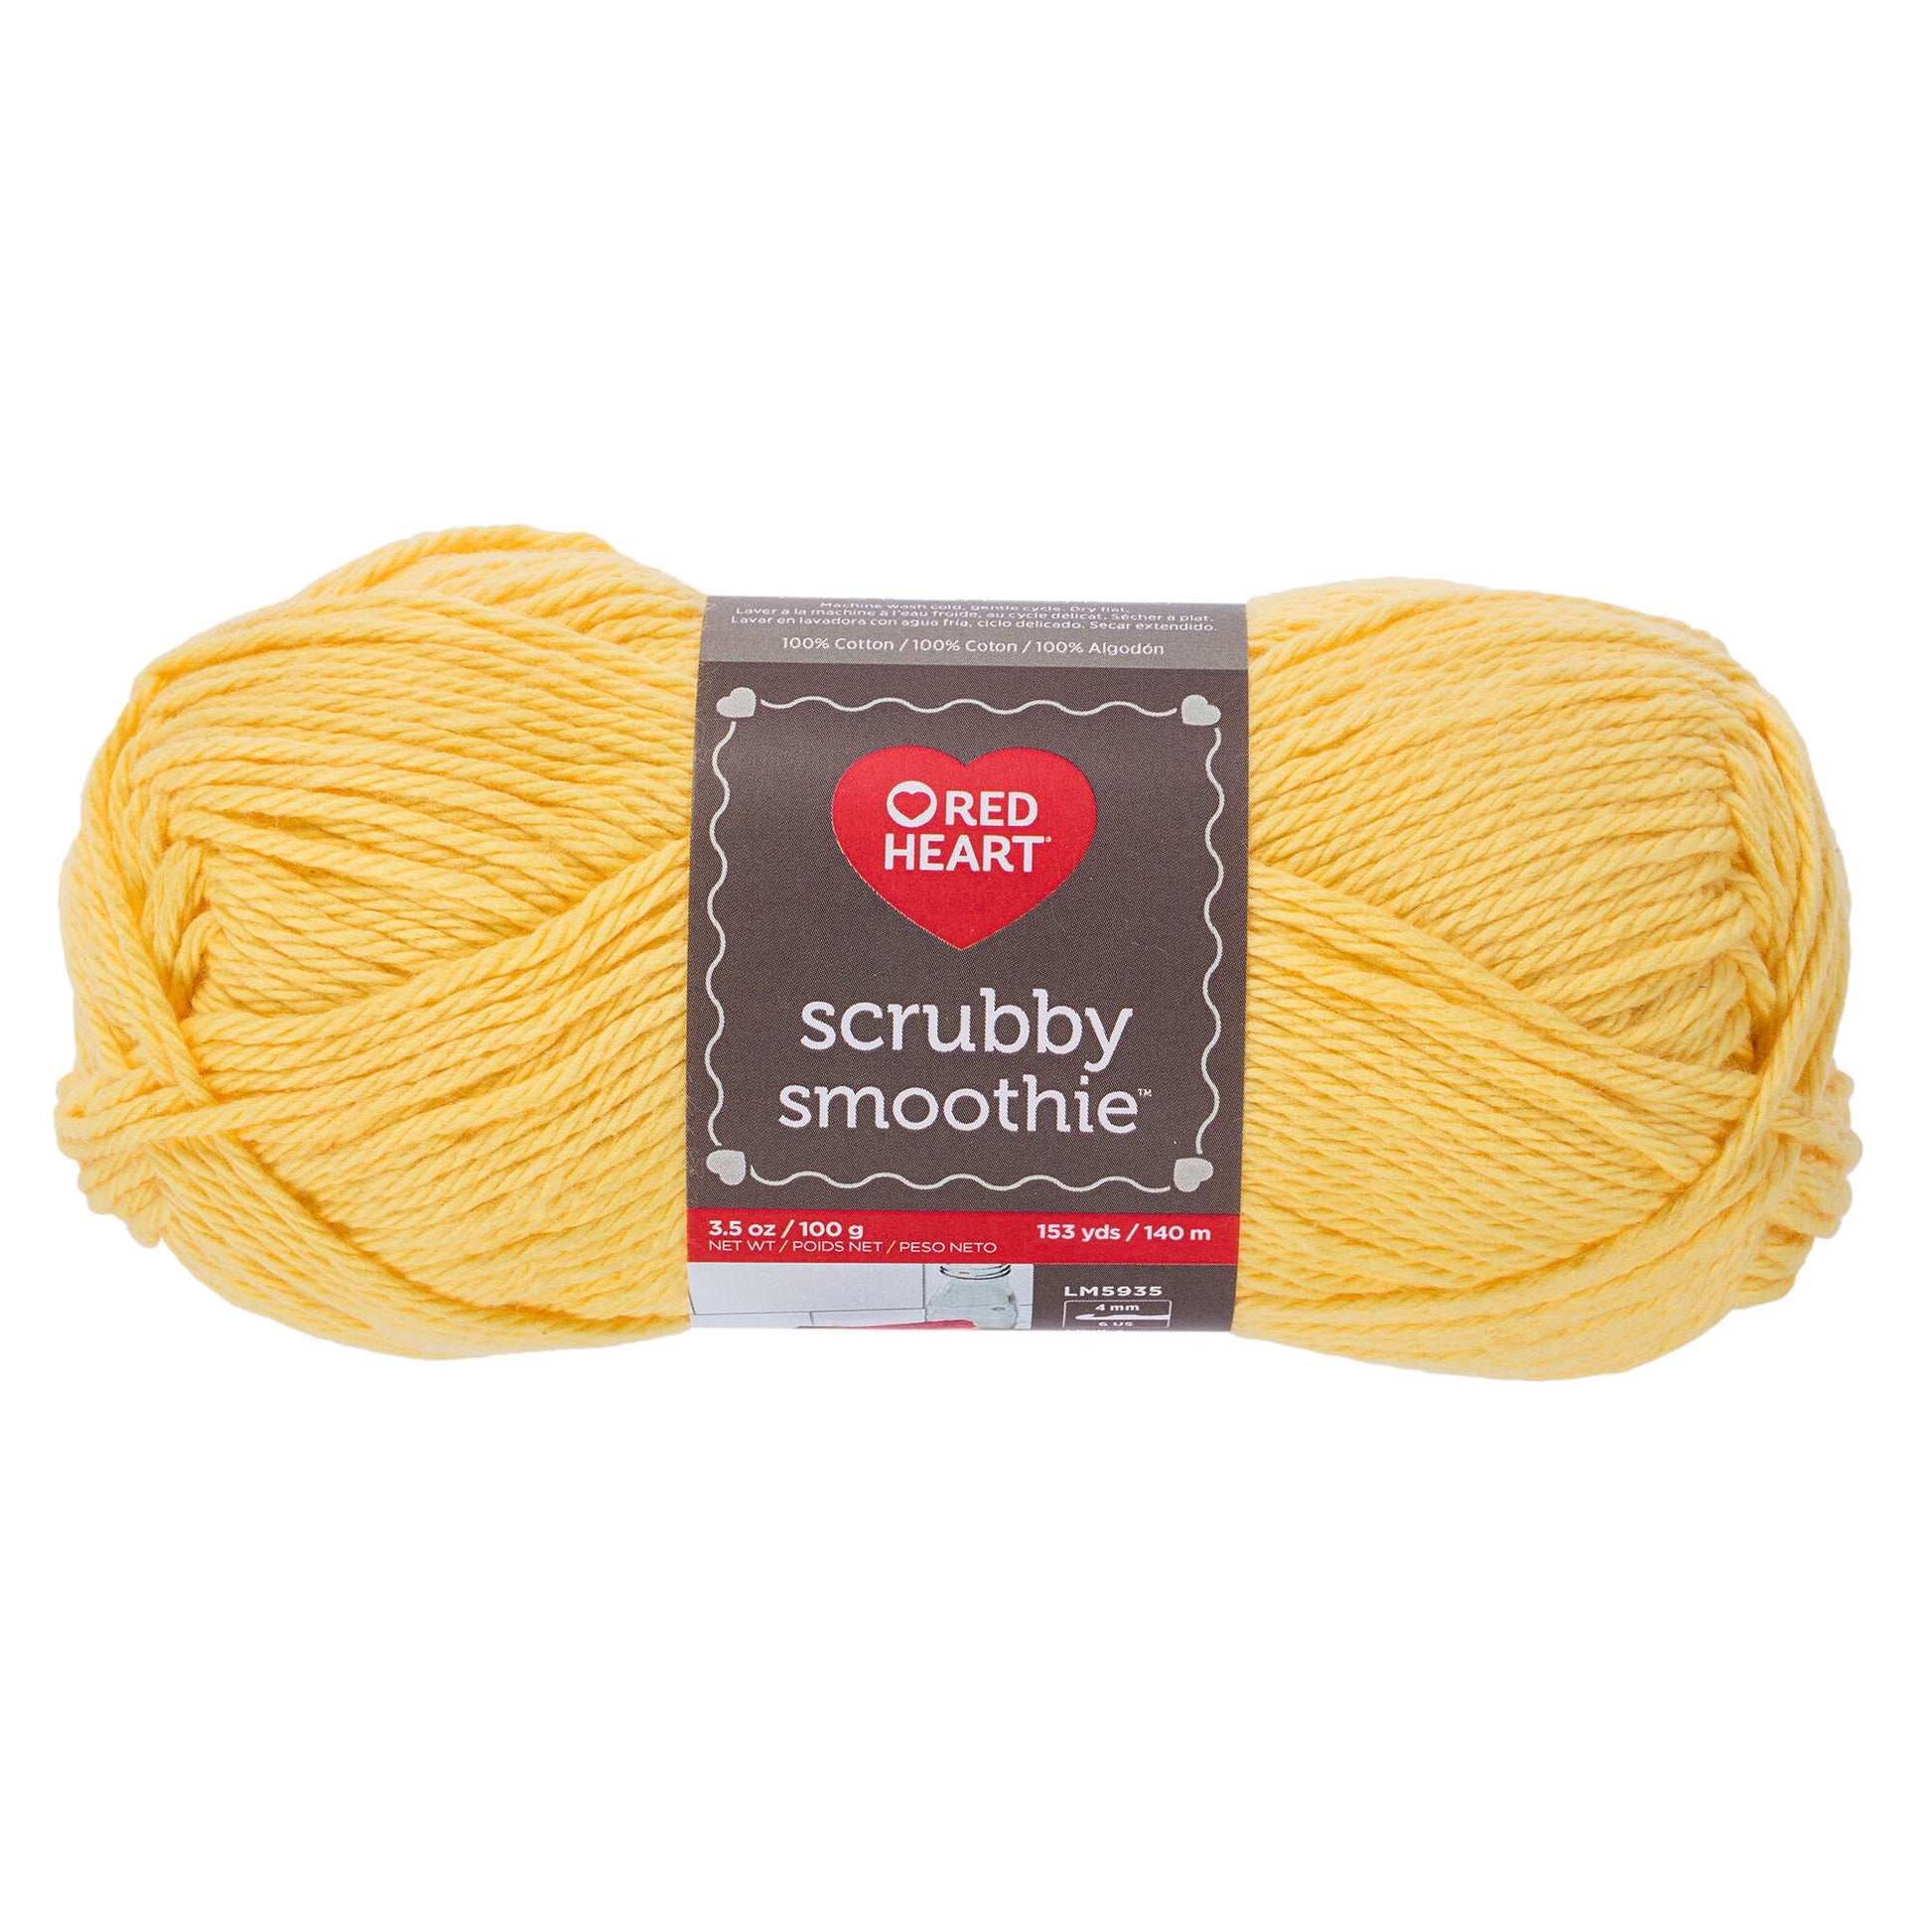 Red Heart Scrubby Smoothie Yarn - Clearance shades Lemony